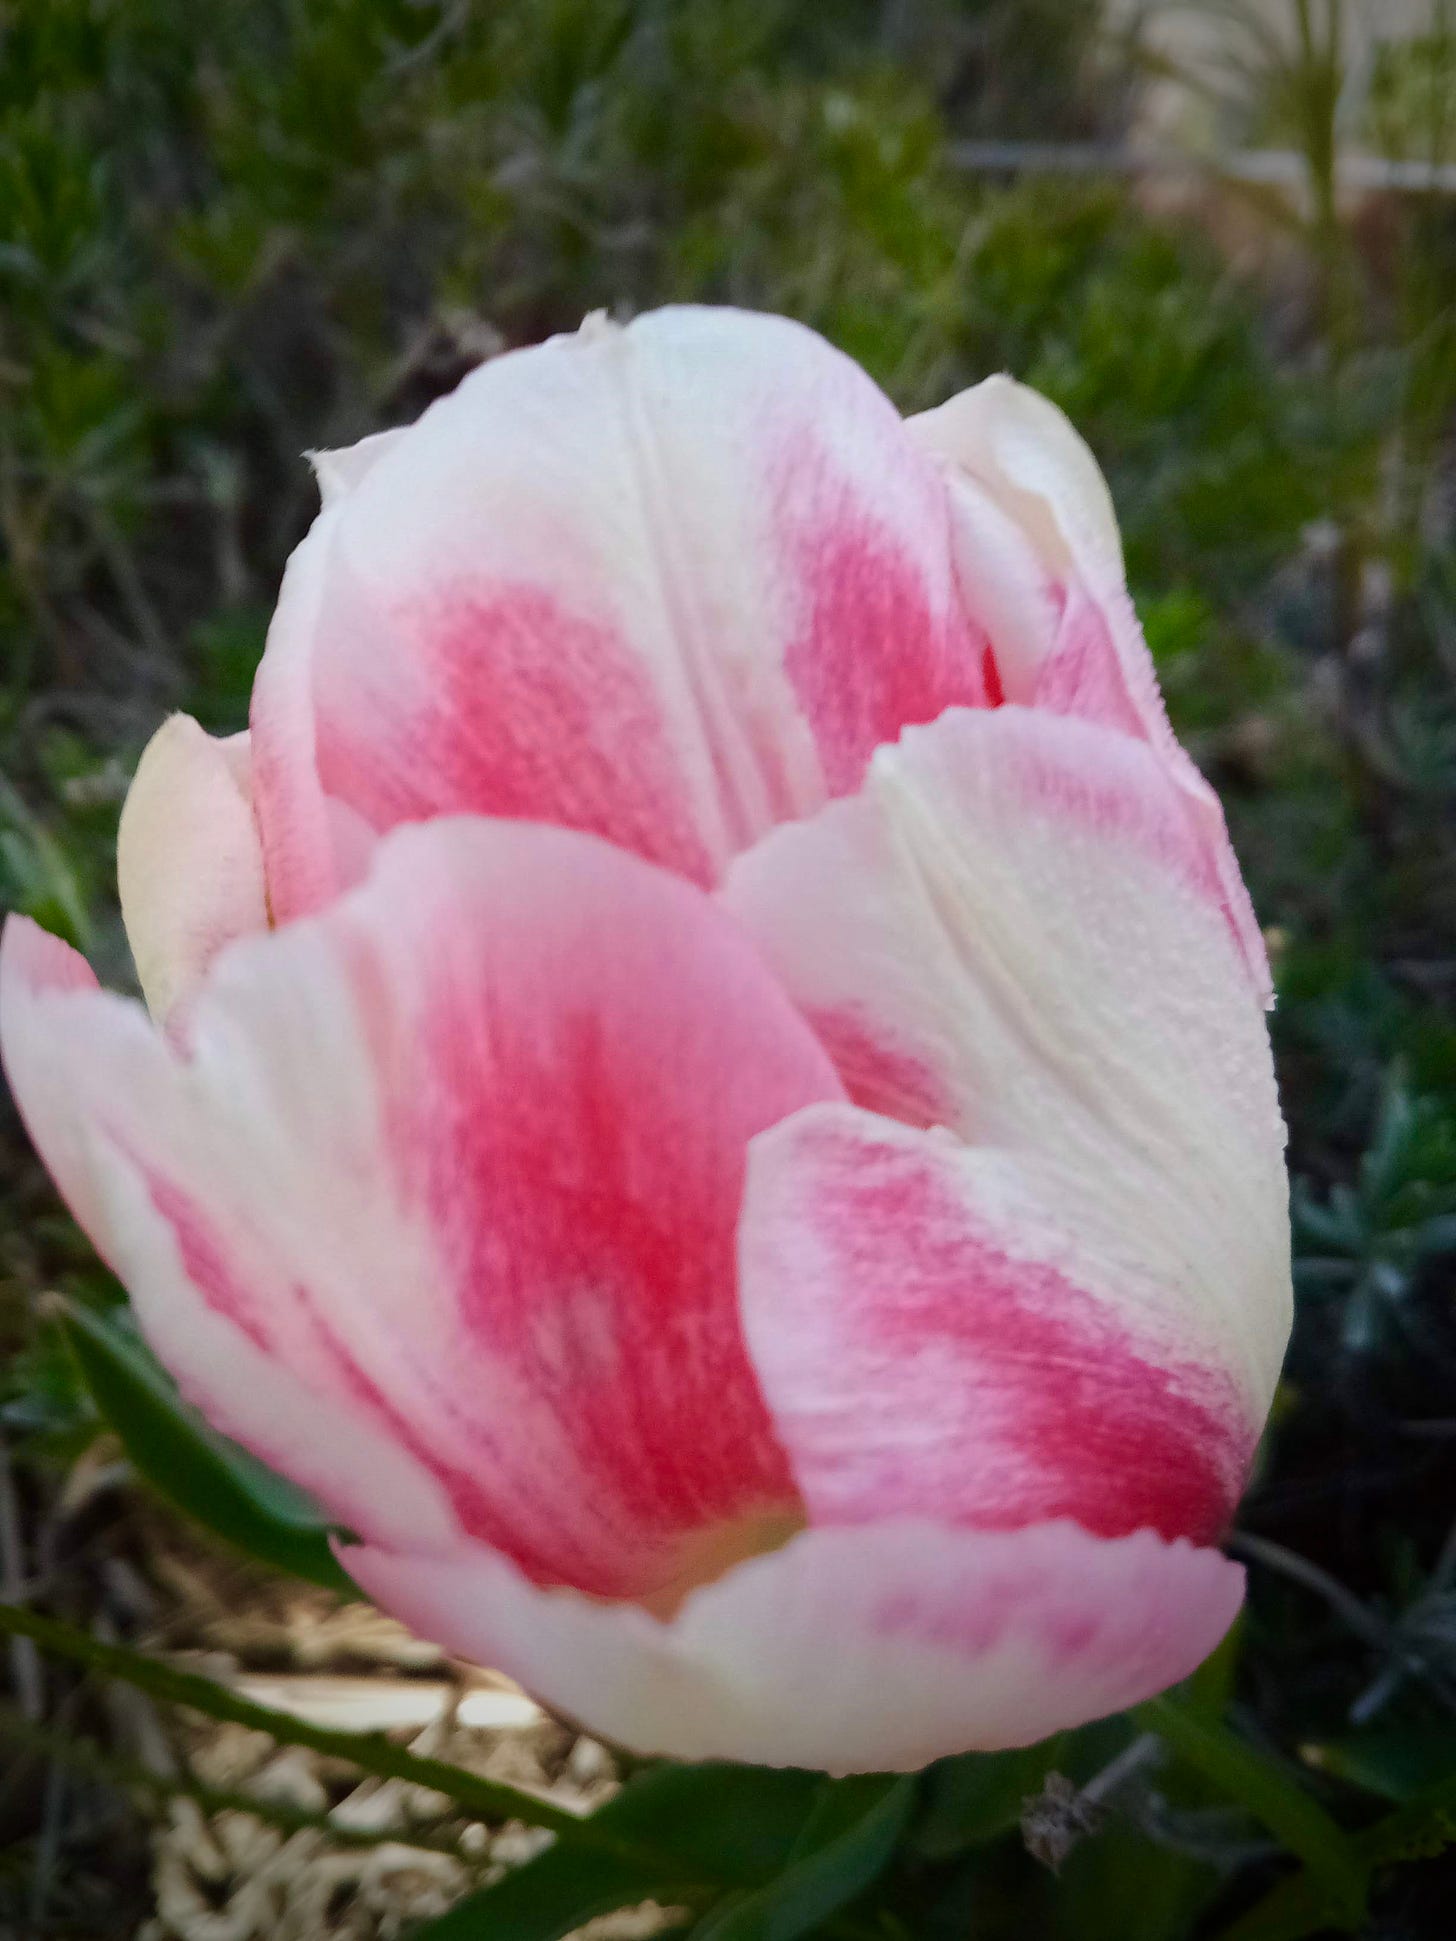 Tulip blossom, pink and white.